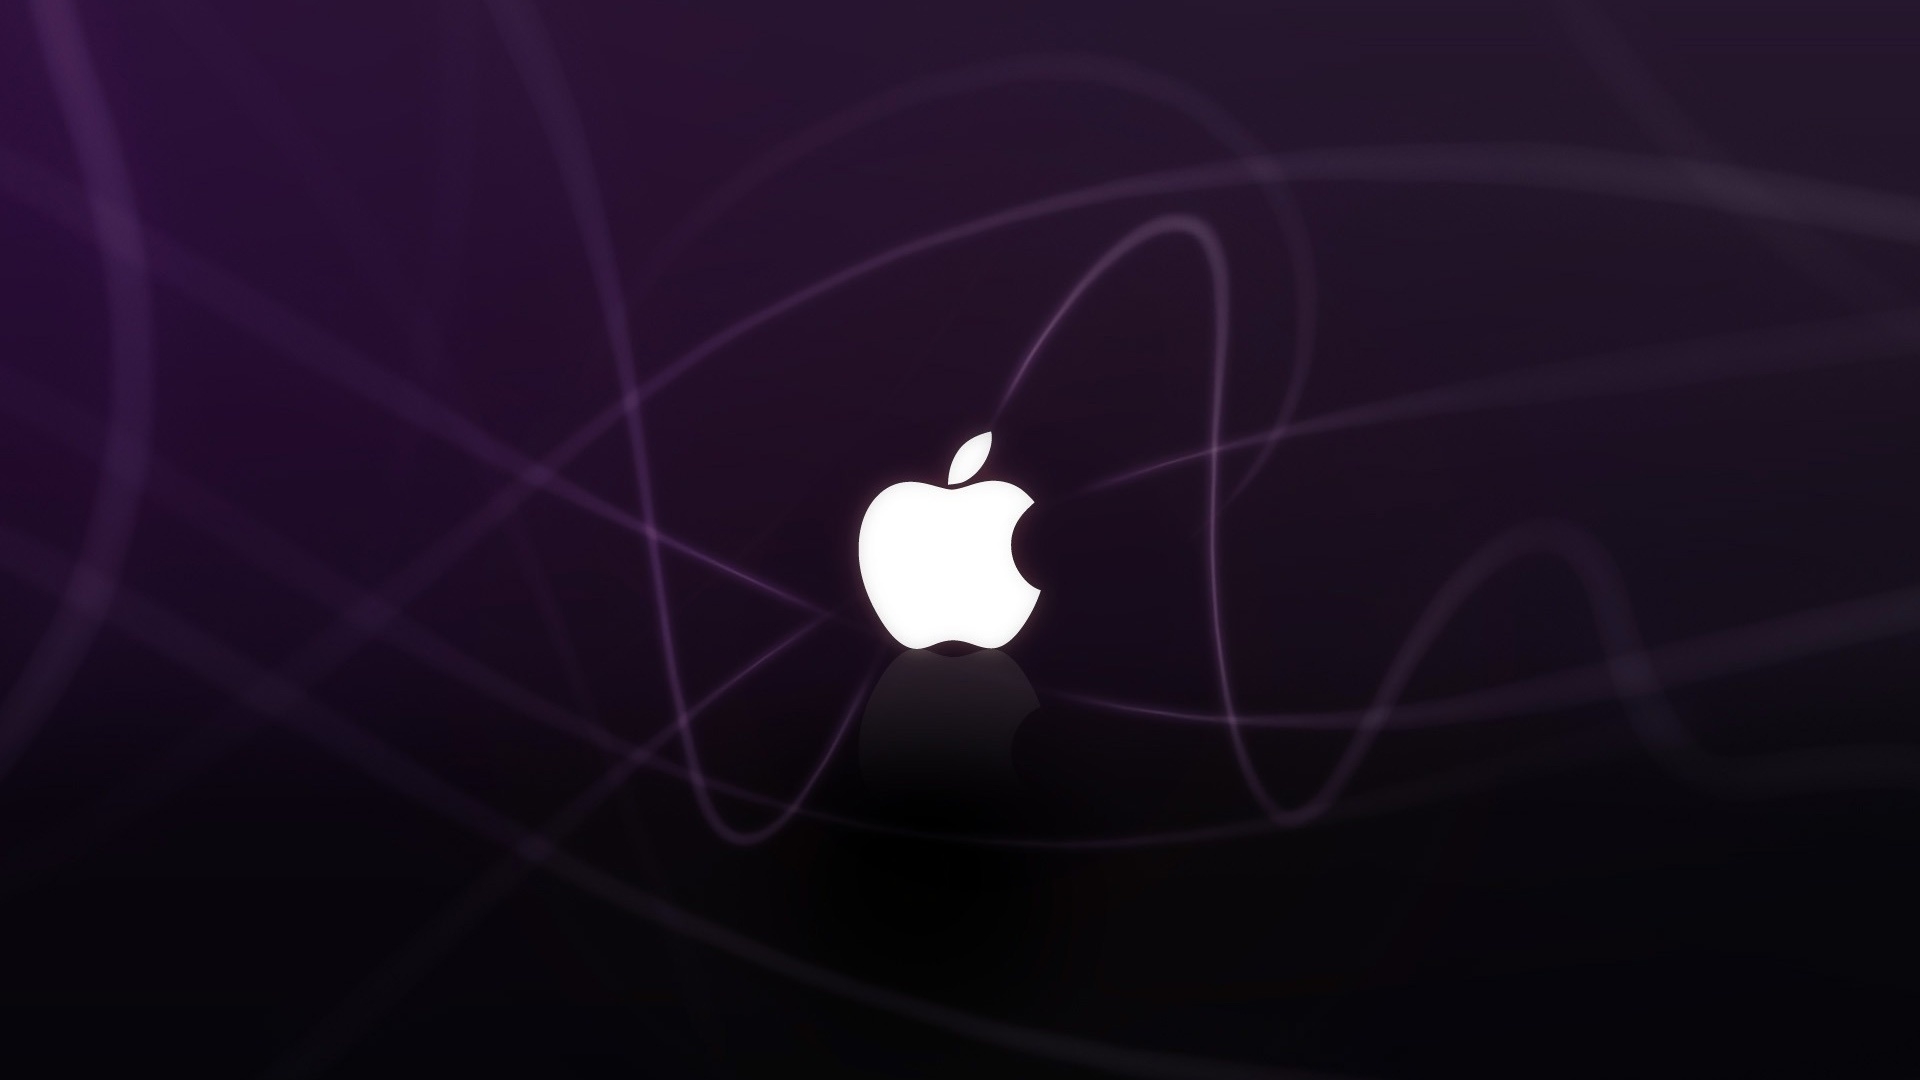 Purple Apple frequency for 1920 x 1080 HDTV 1080p resolution